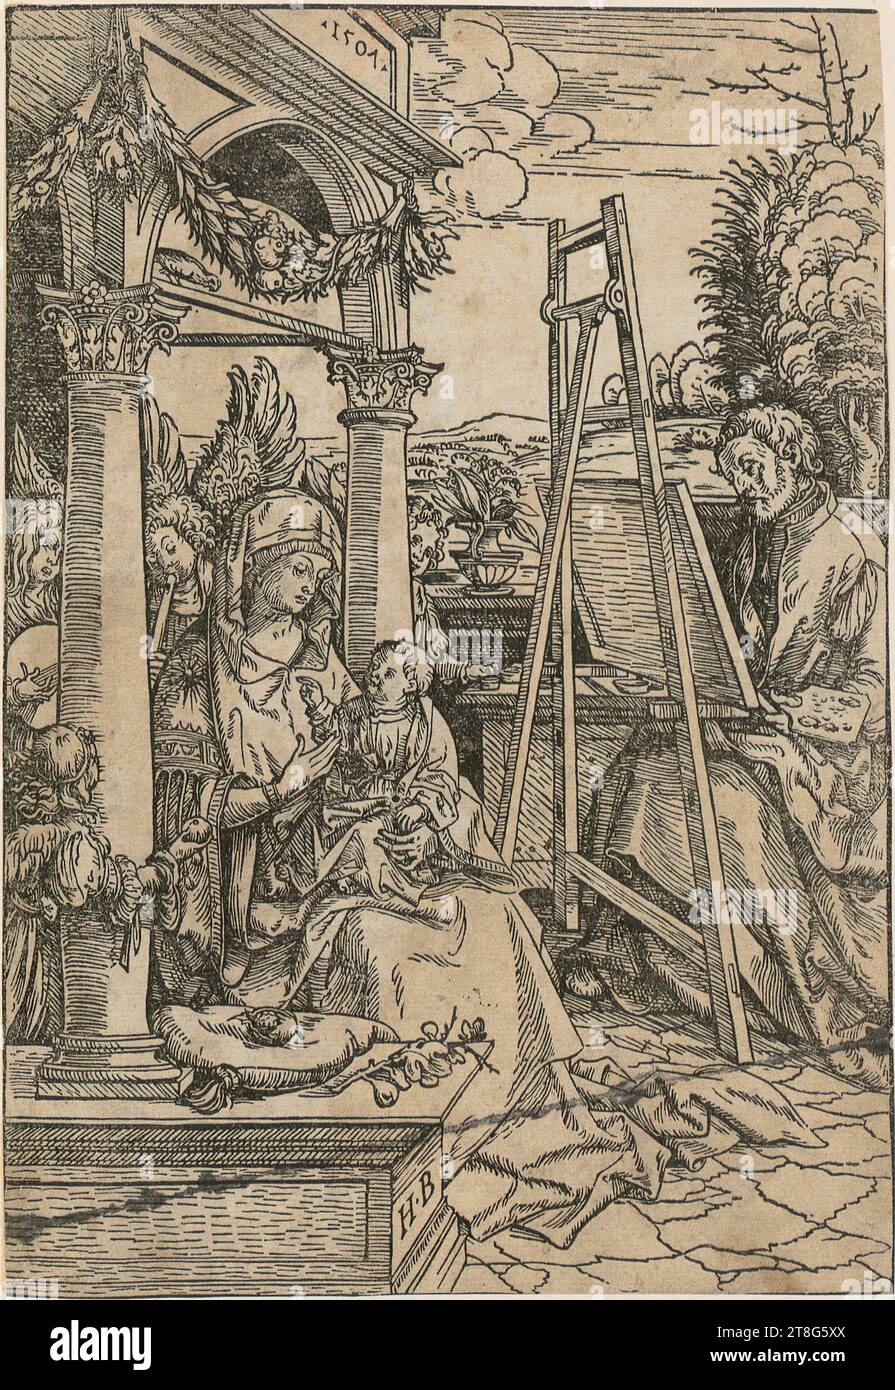 Hans Burgkmair (1473 - 1531), Saint Luke painting the Madonna, print medium: 1507, woodcut, sheet size: 22.3 x 15.3 cm, top left on architrave dated '1507' and bottom left on wall projection monogrammed 'H . B Stock Photo